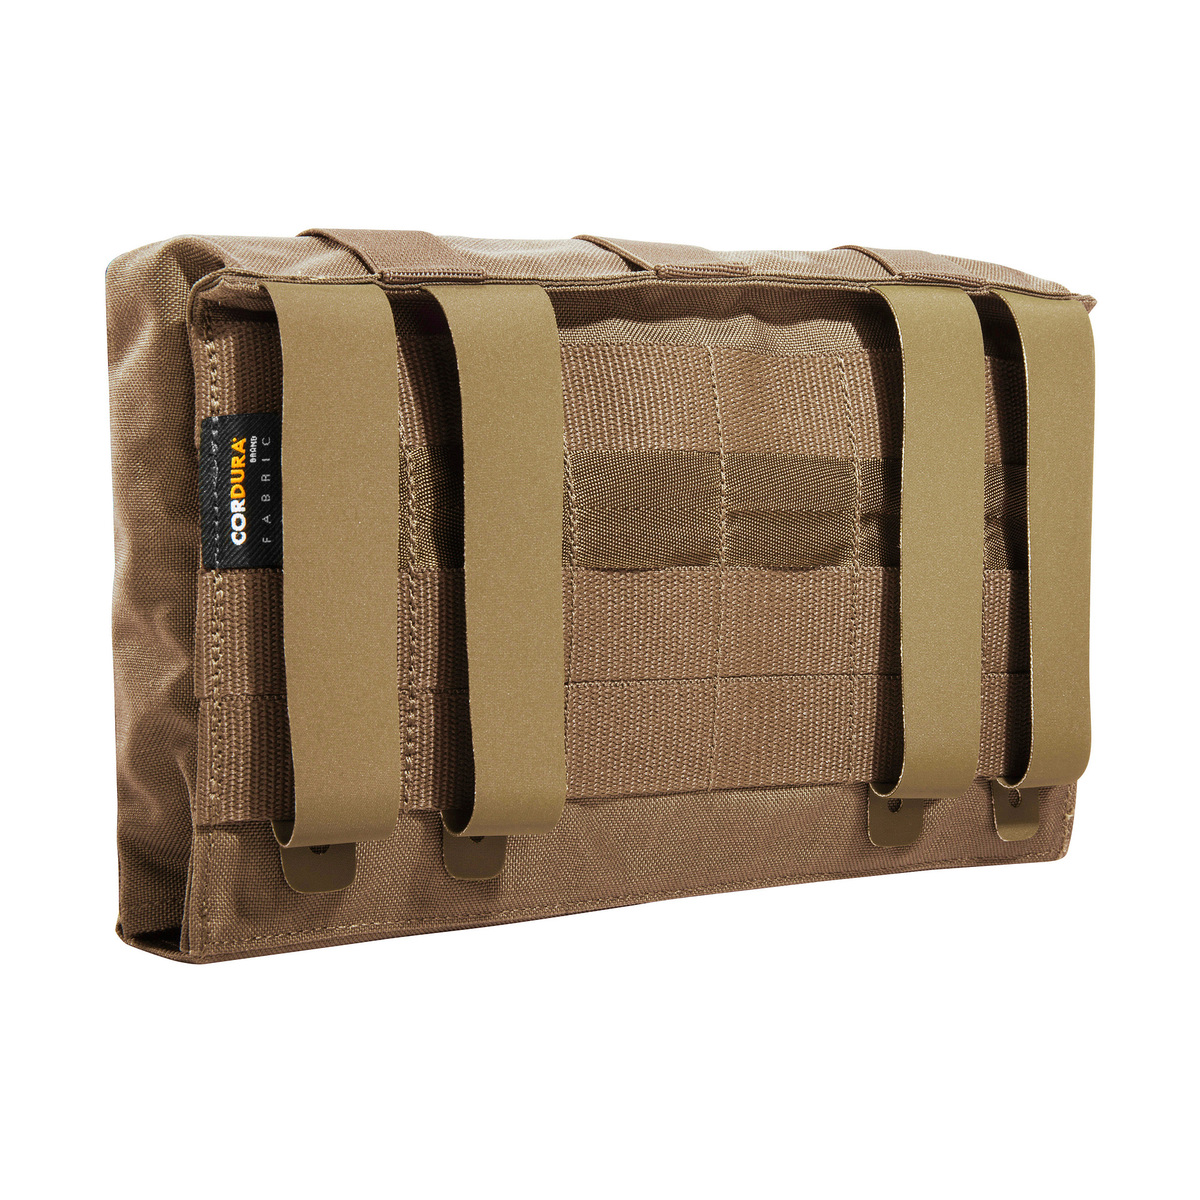 IFAK Pouch Coyote brown, One Size